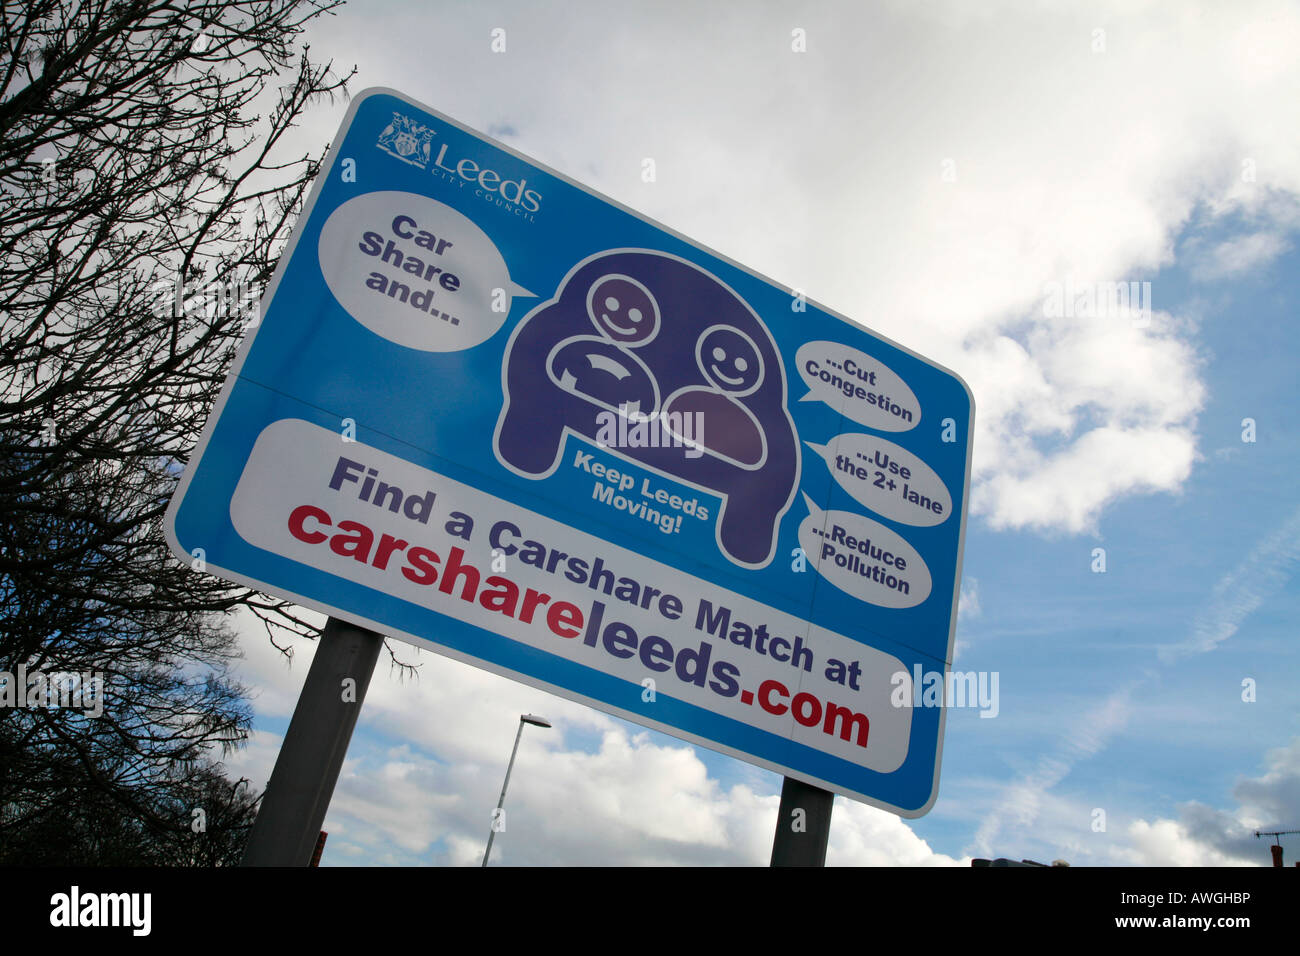 Road sign for Carshare lane in Leeds on the A647 Stock Photo